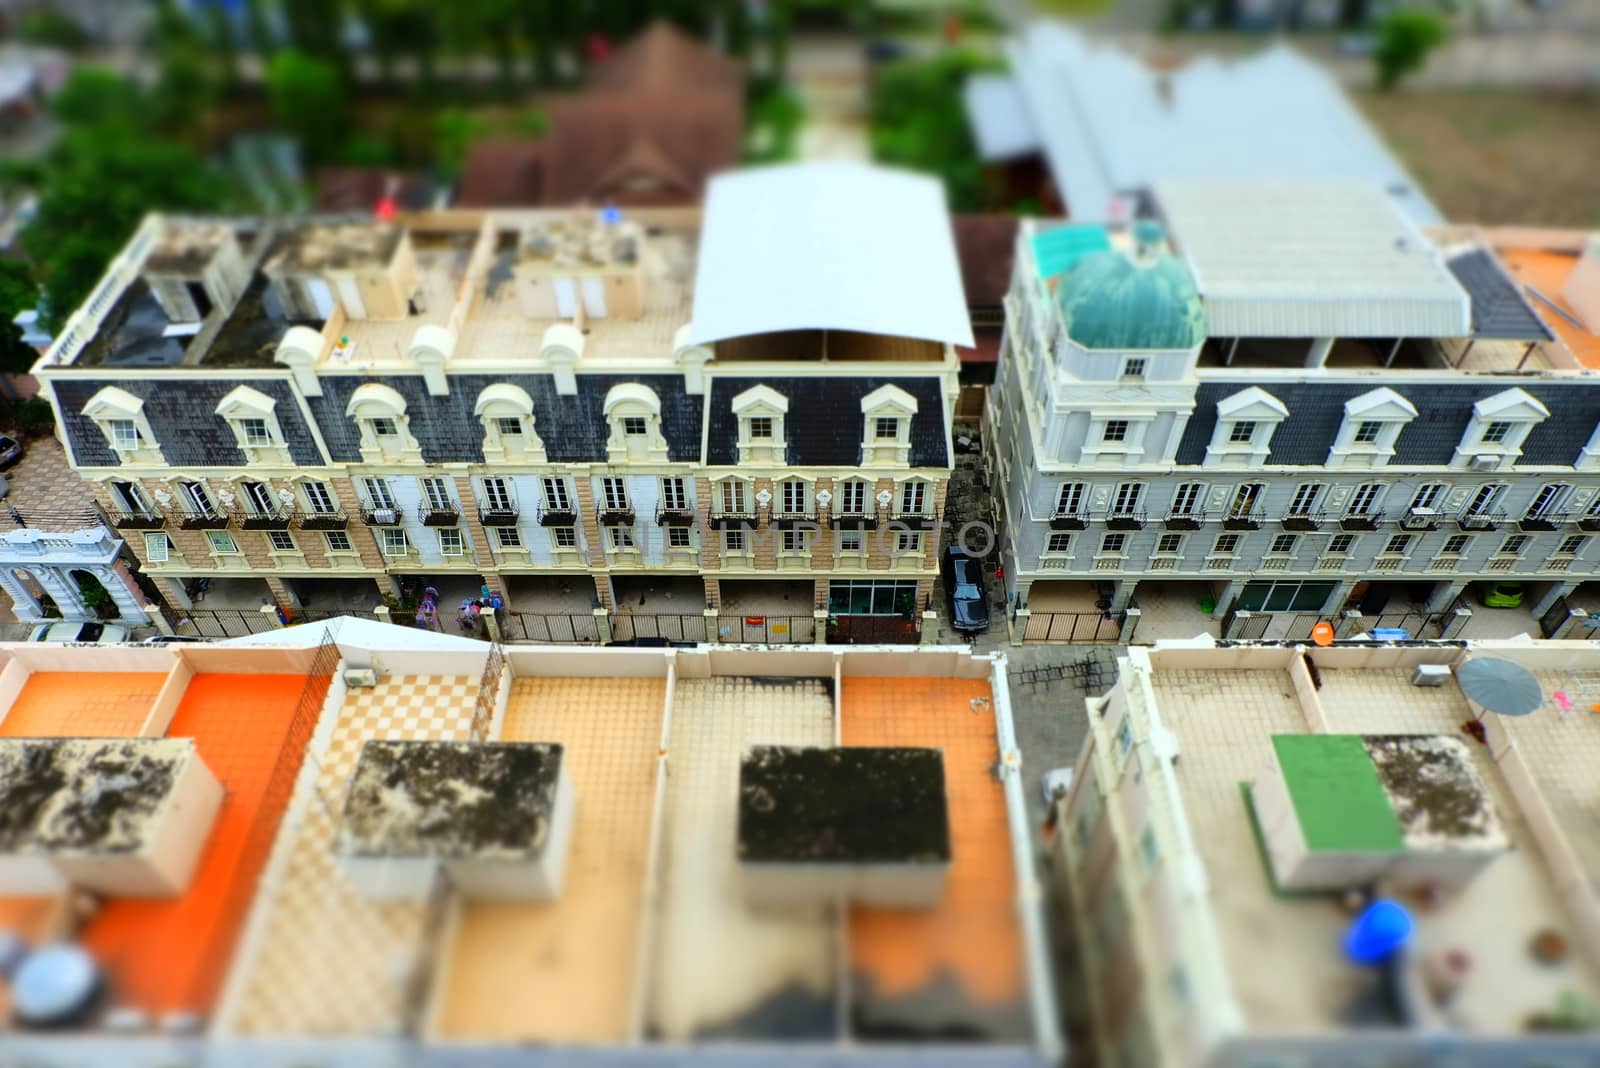 Aerial views of Old Buildning in Tilt Shift Effect. by mesamong